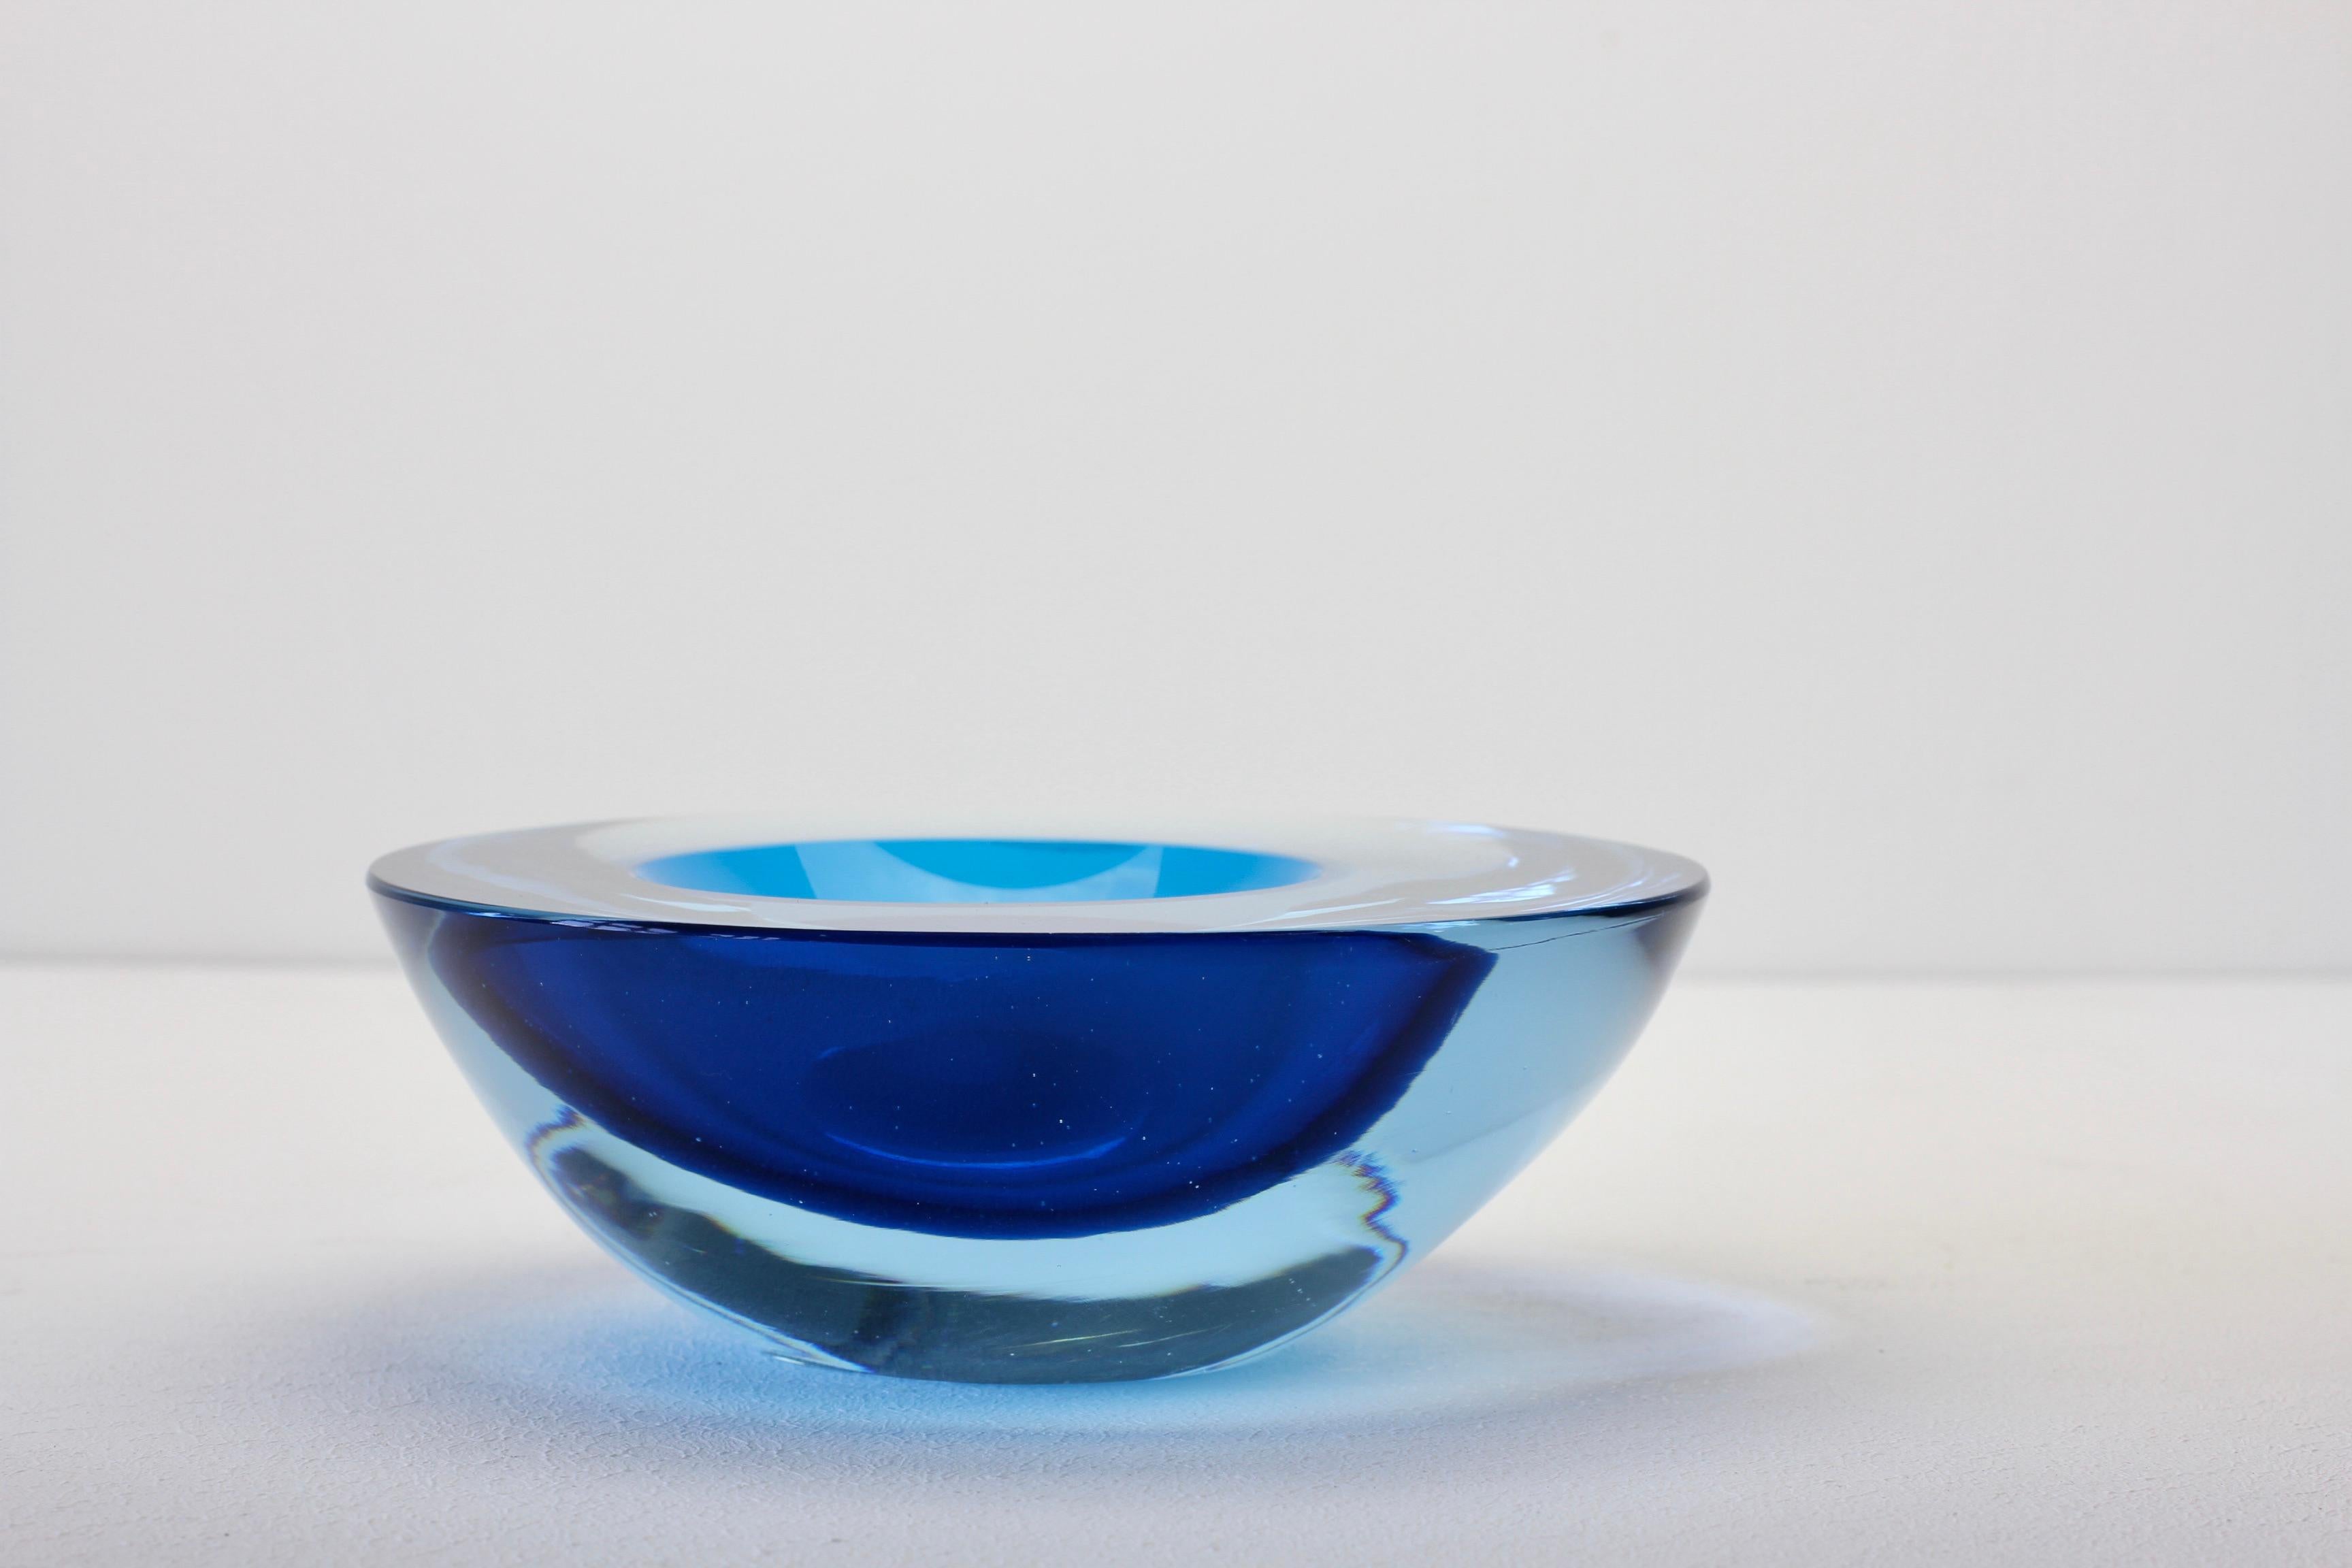 Large Cenedese Italian Asymmetric Blue Sommerso Murano Glass Bowl, Dish, Ashtray For Sale 1